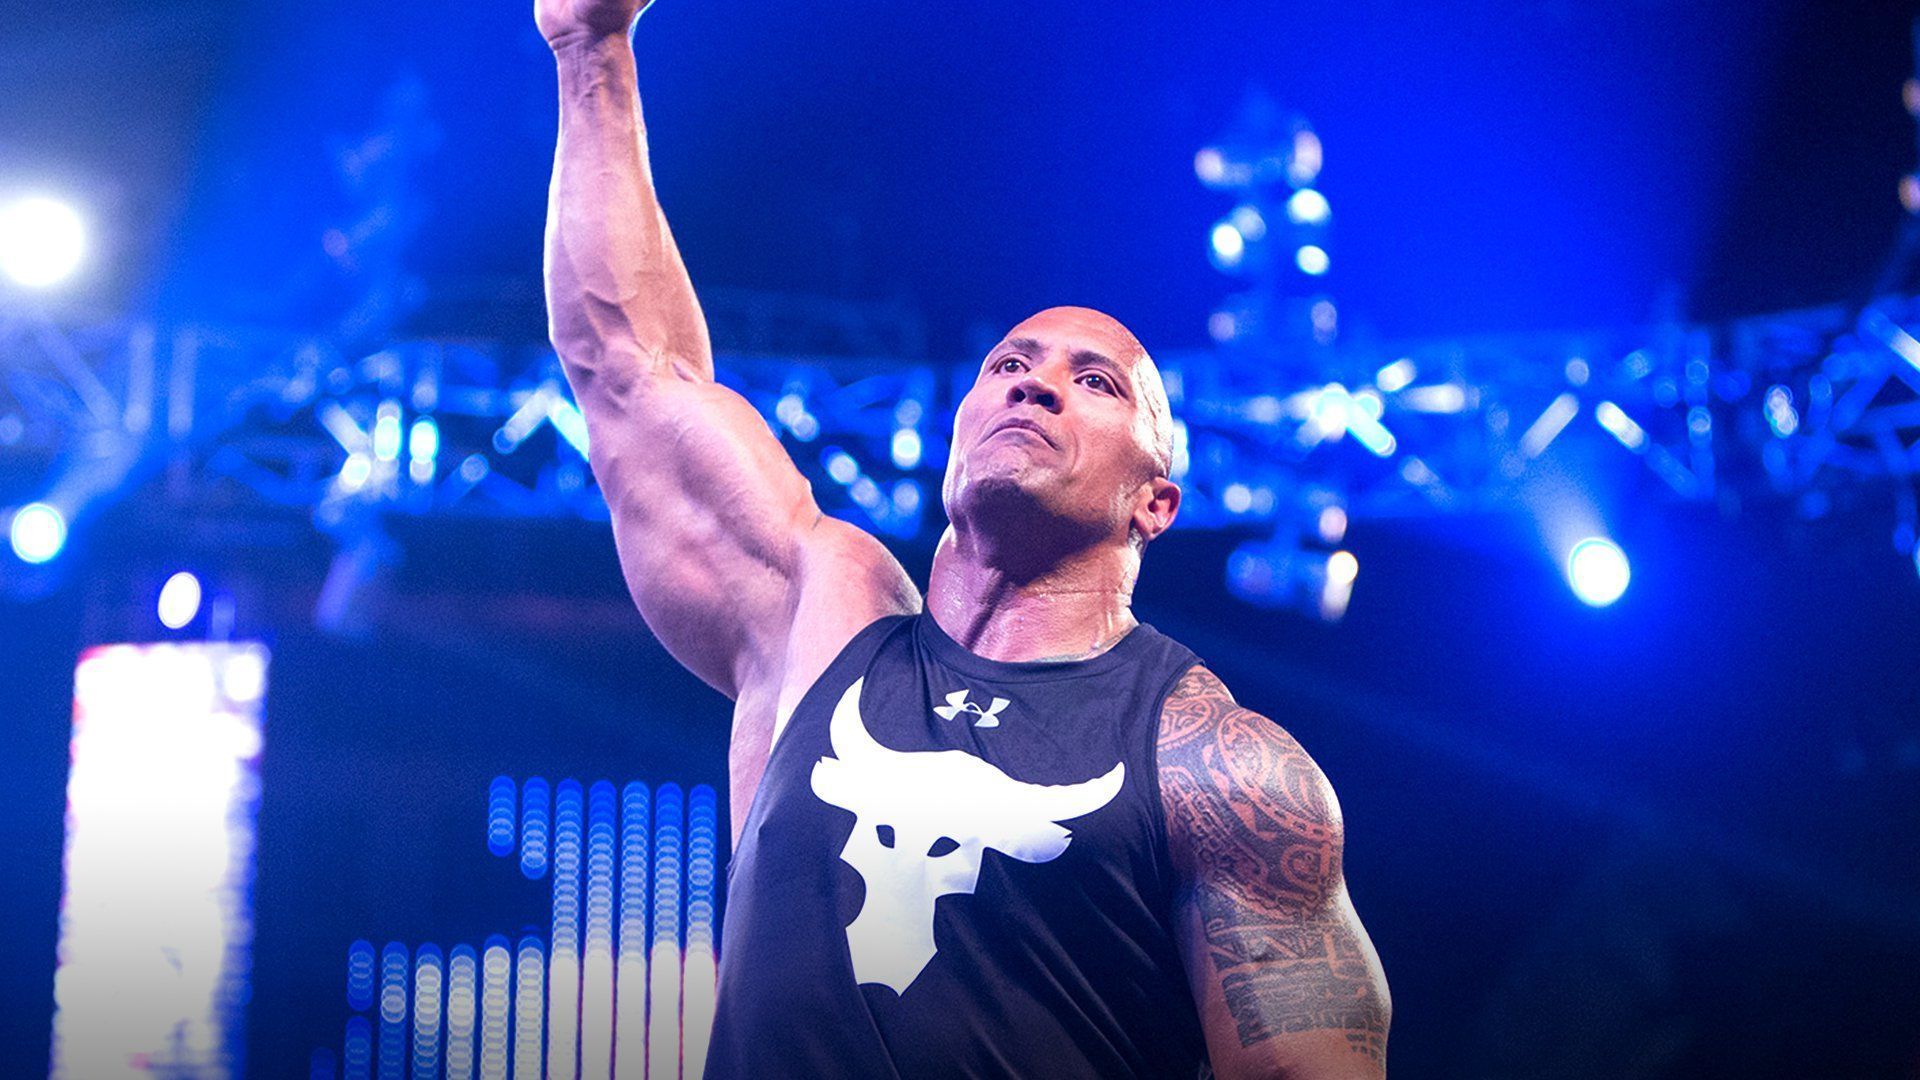 The Rock showed up on SmackDown this week